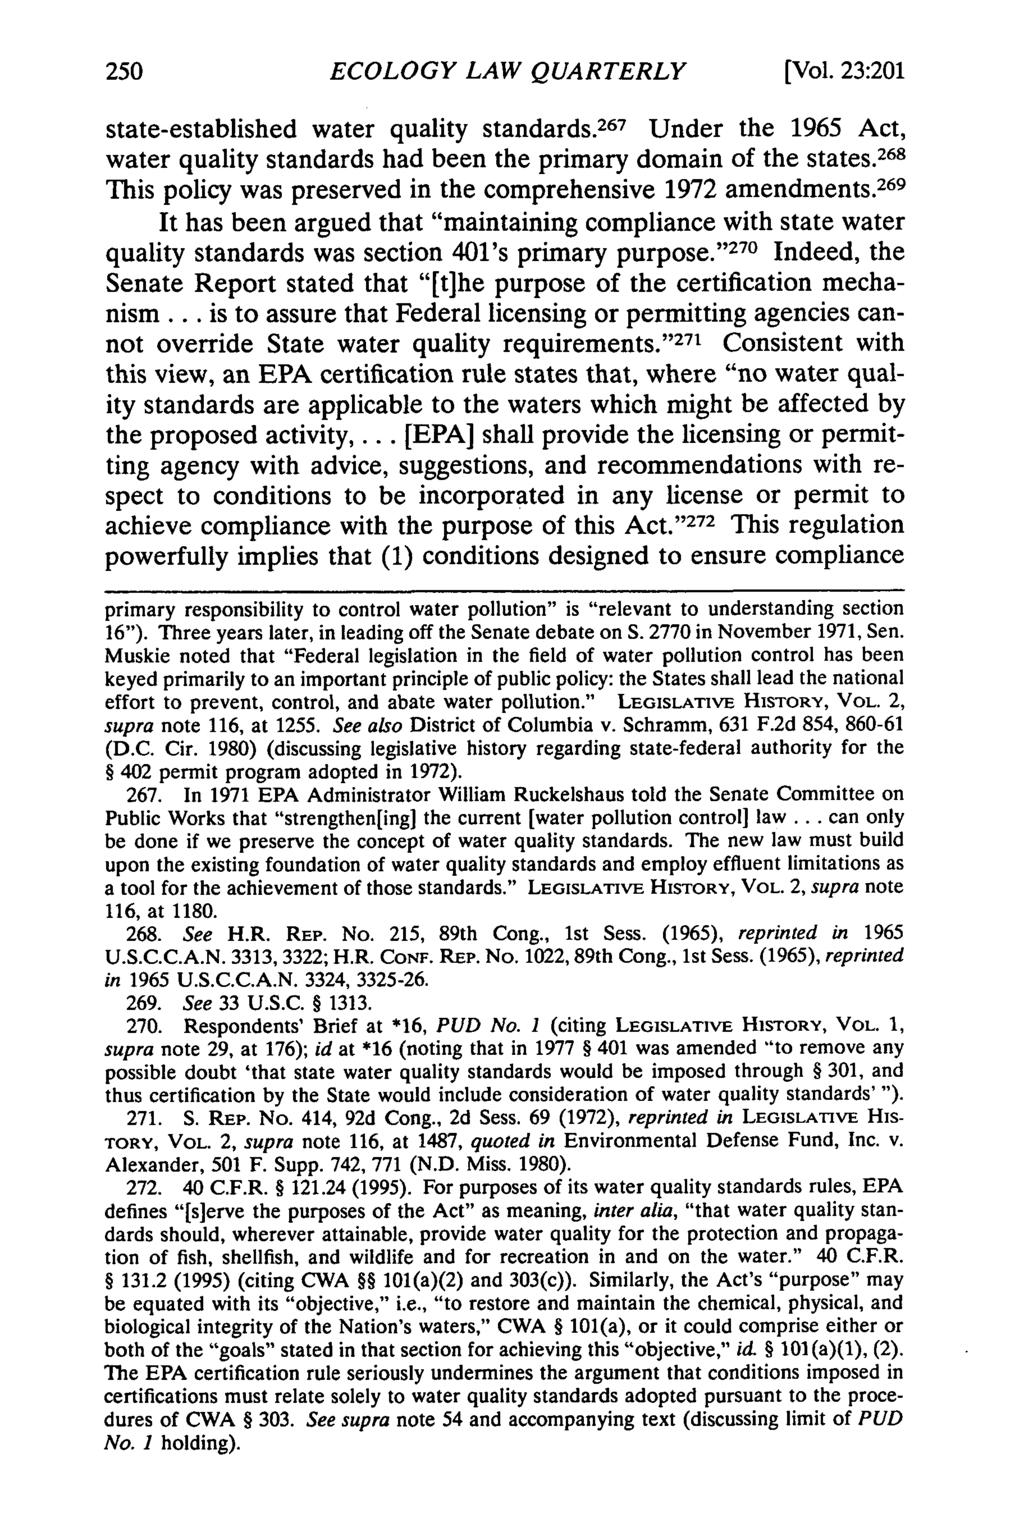 ECOLOGY LAW QUARTERLY [Vol. 23:201 state-established water quality standards. 267 Under the 1965 Act, water quality standards had been the primary domain of the states.